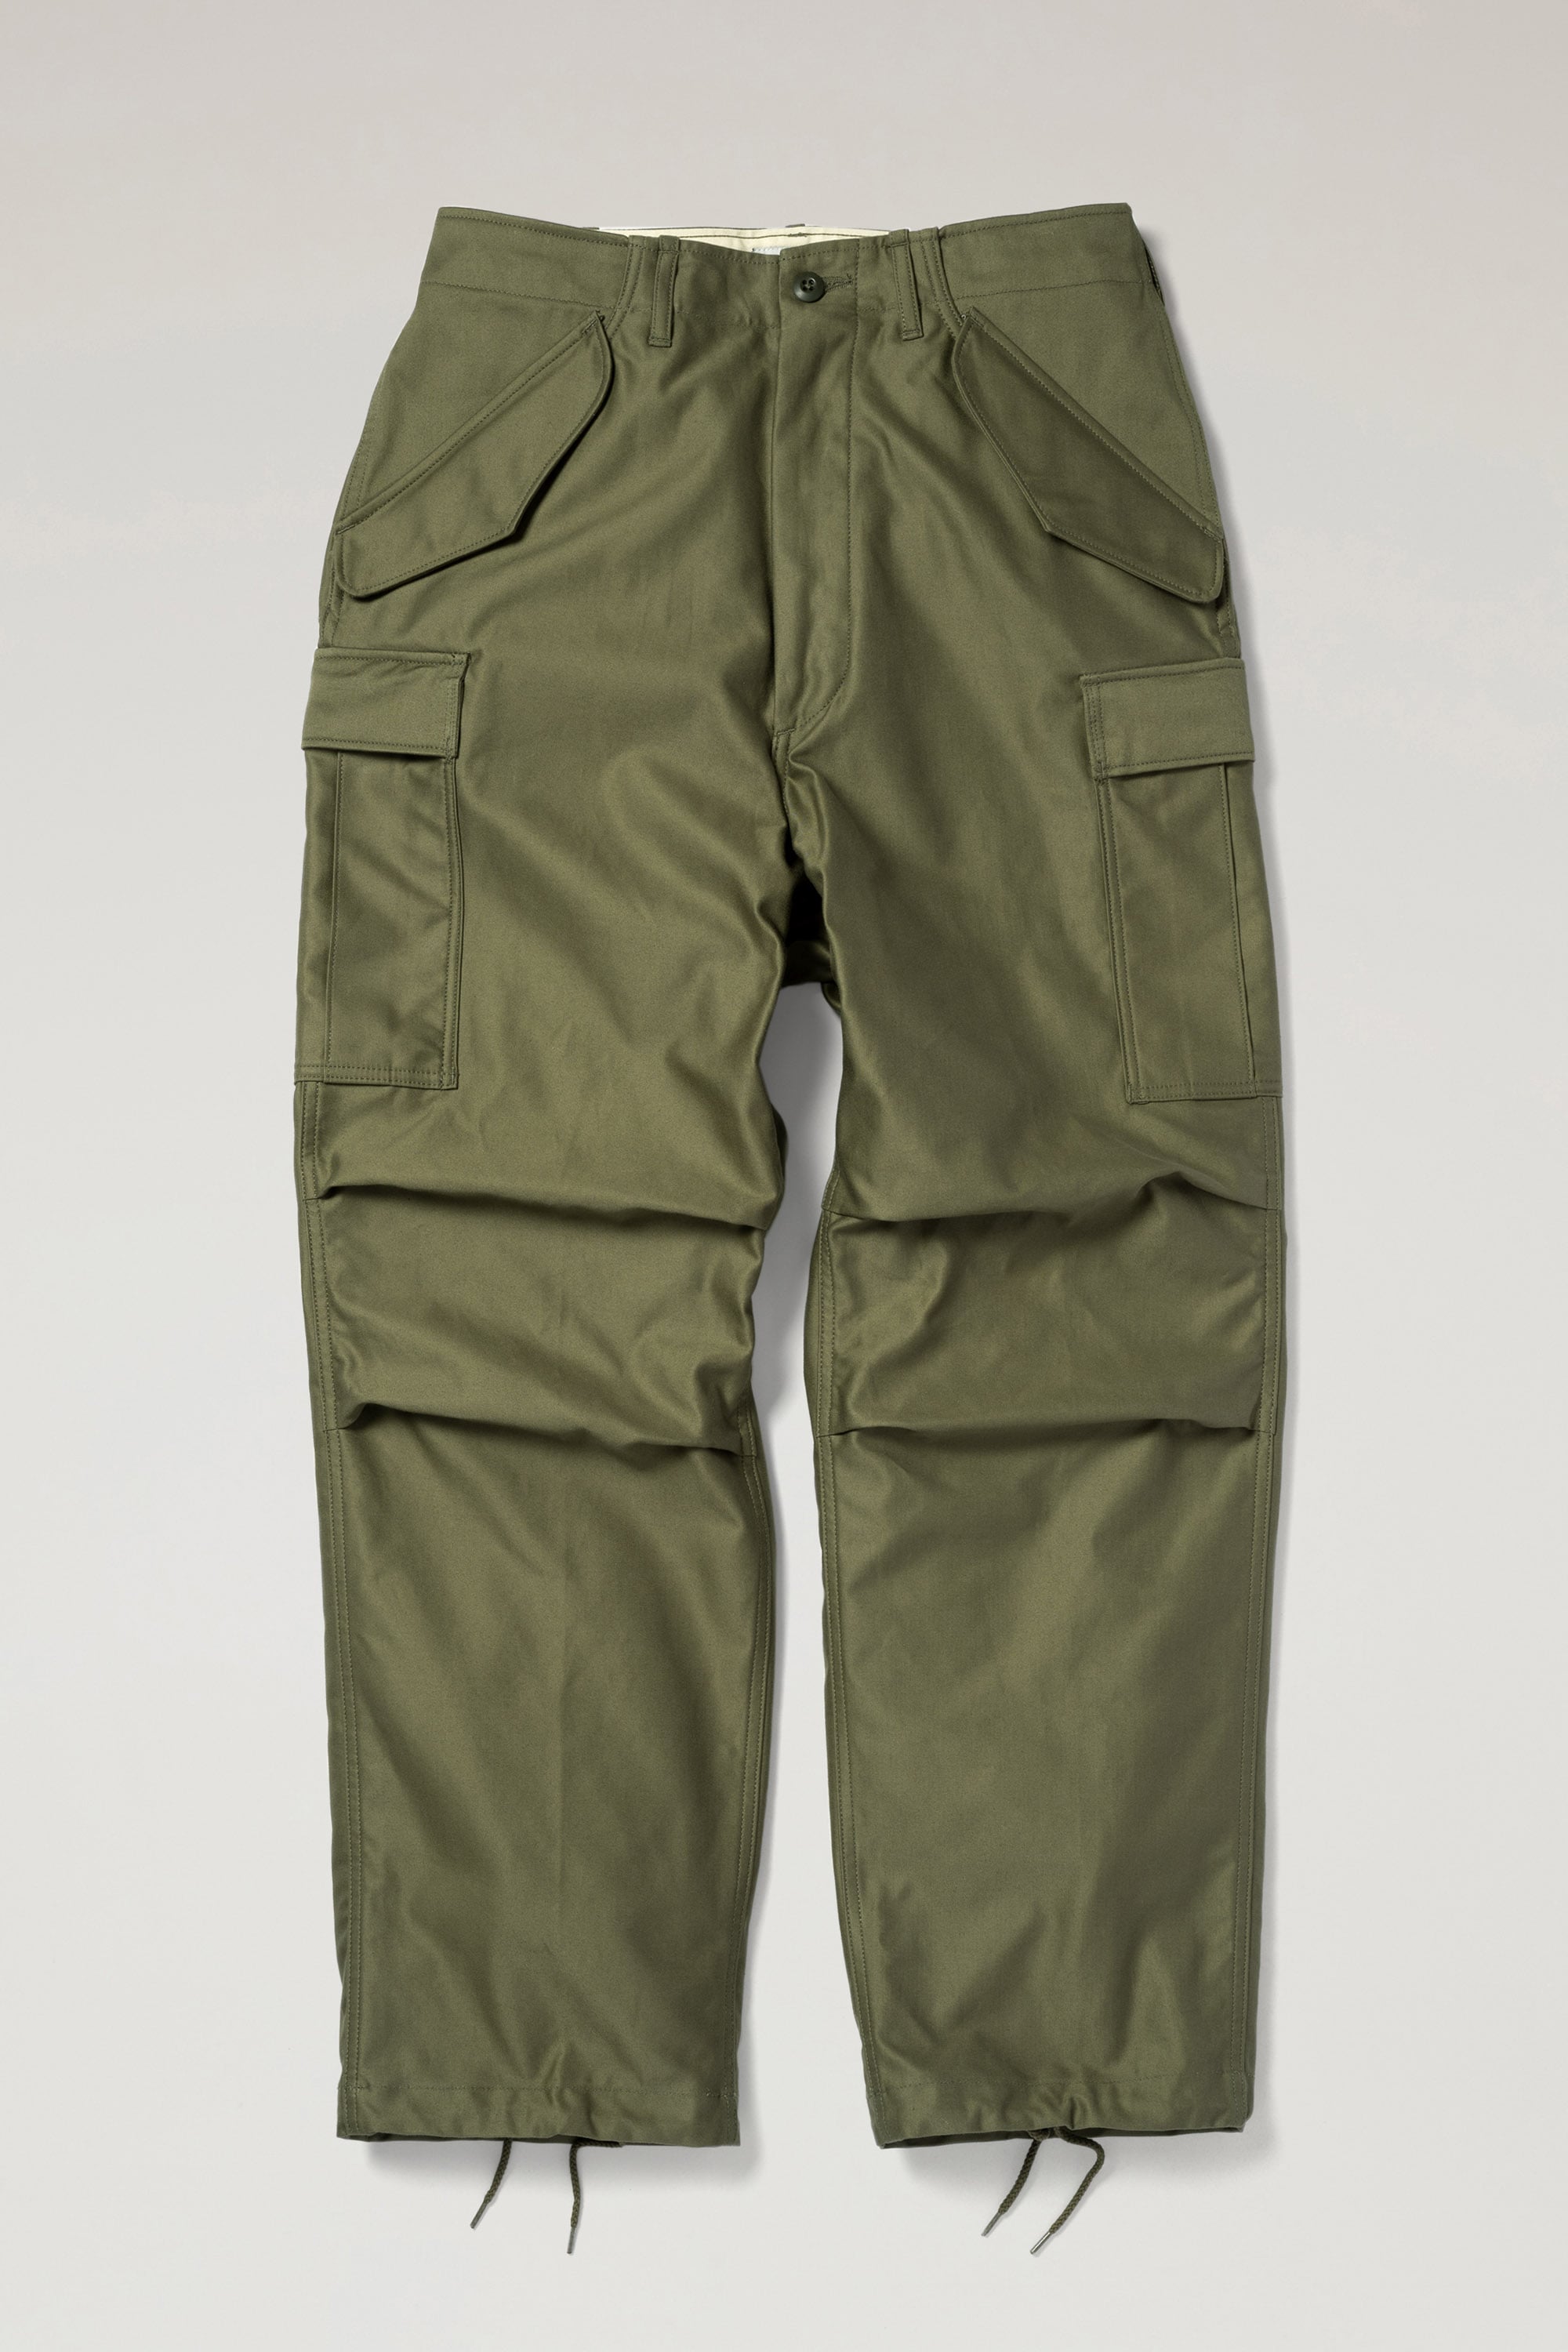 M-65 TROUSERS